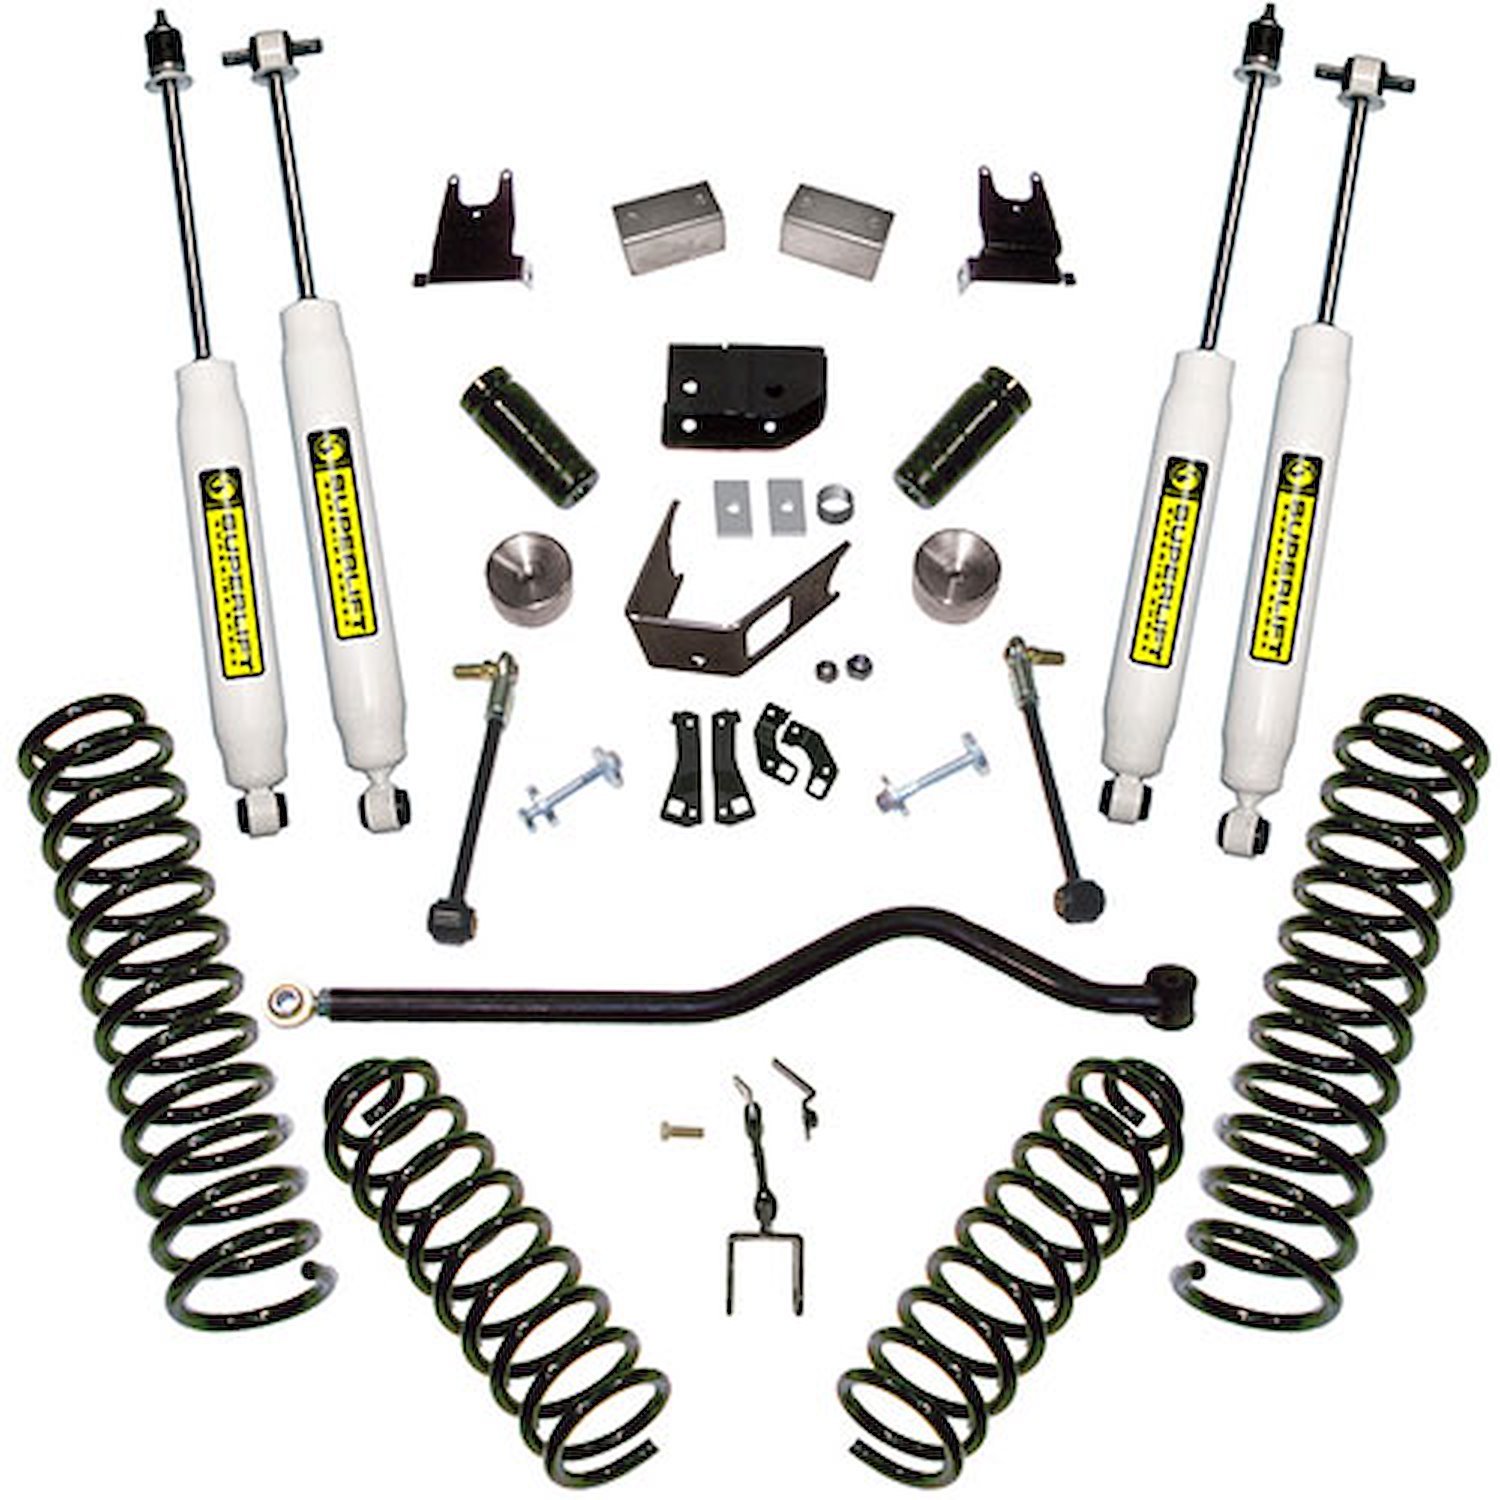 K928 Front and Rear Suspension Lift Kit, Lift Amount: 4 in. Front/4 in. Rear